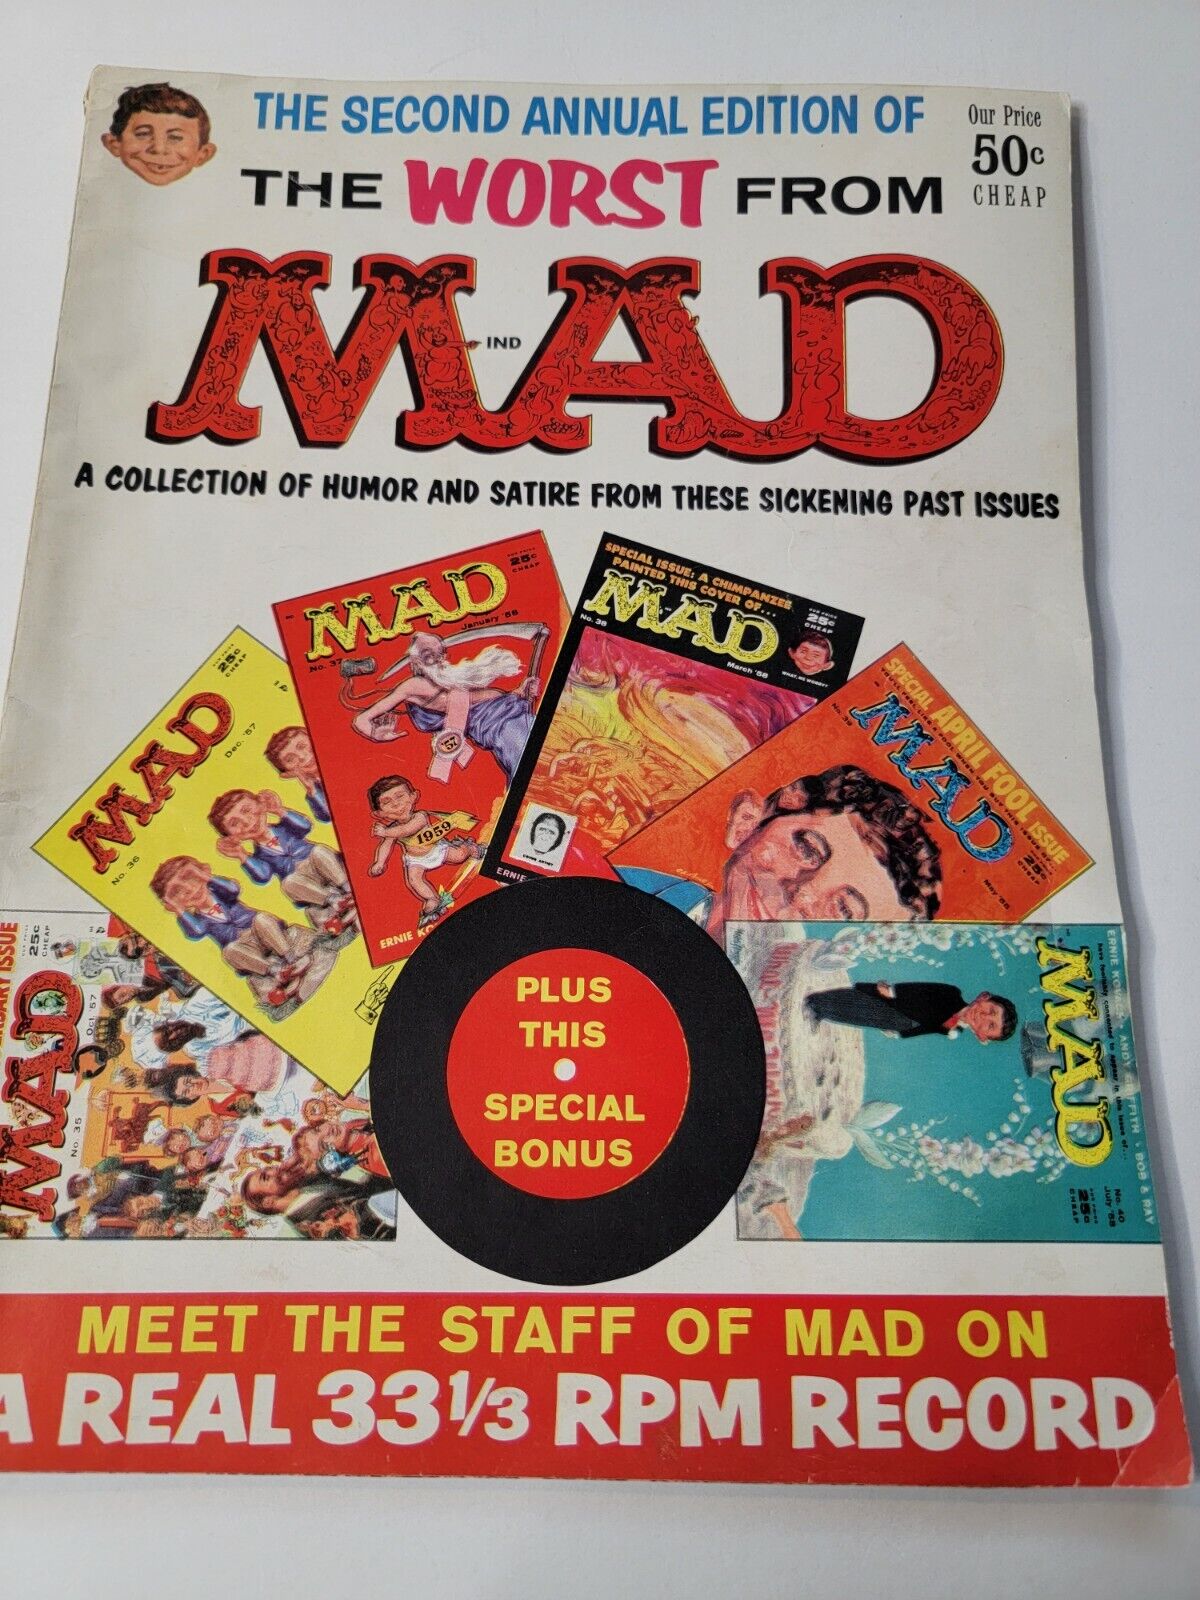 Mad Magazine Vintage #2 1957 Worst From Mad 1957-1958 Second Annual Edition